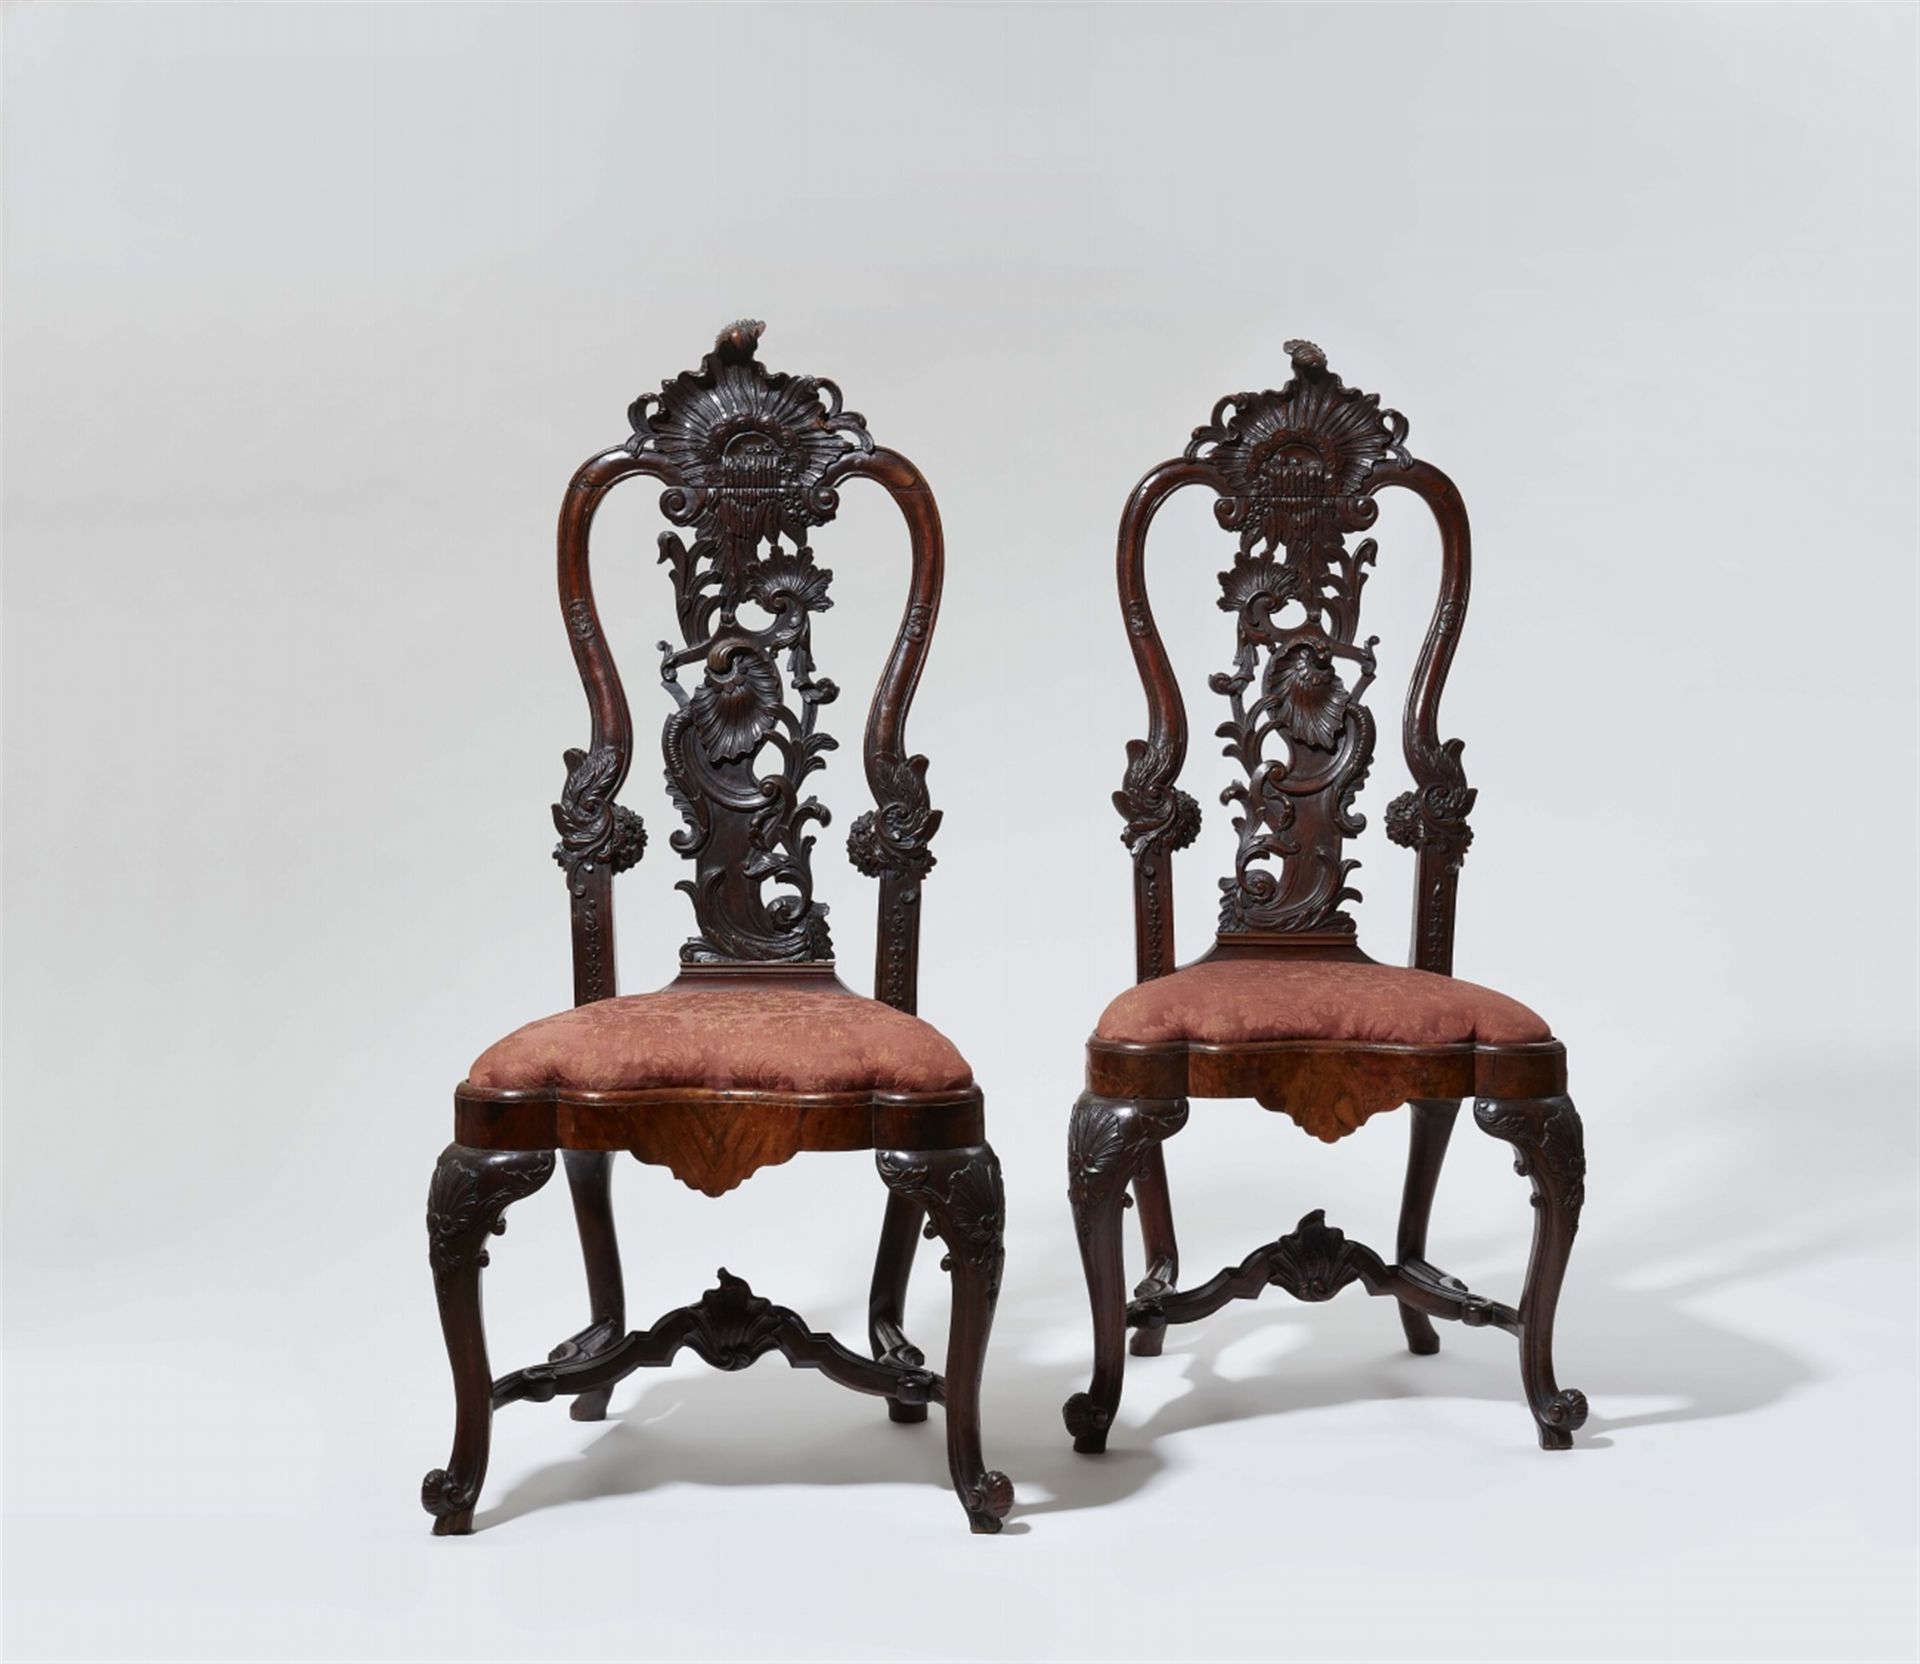 A pair of important Dutch Rococo chairs